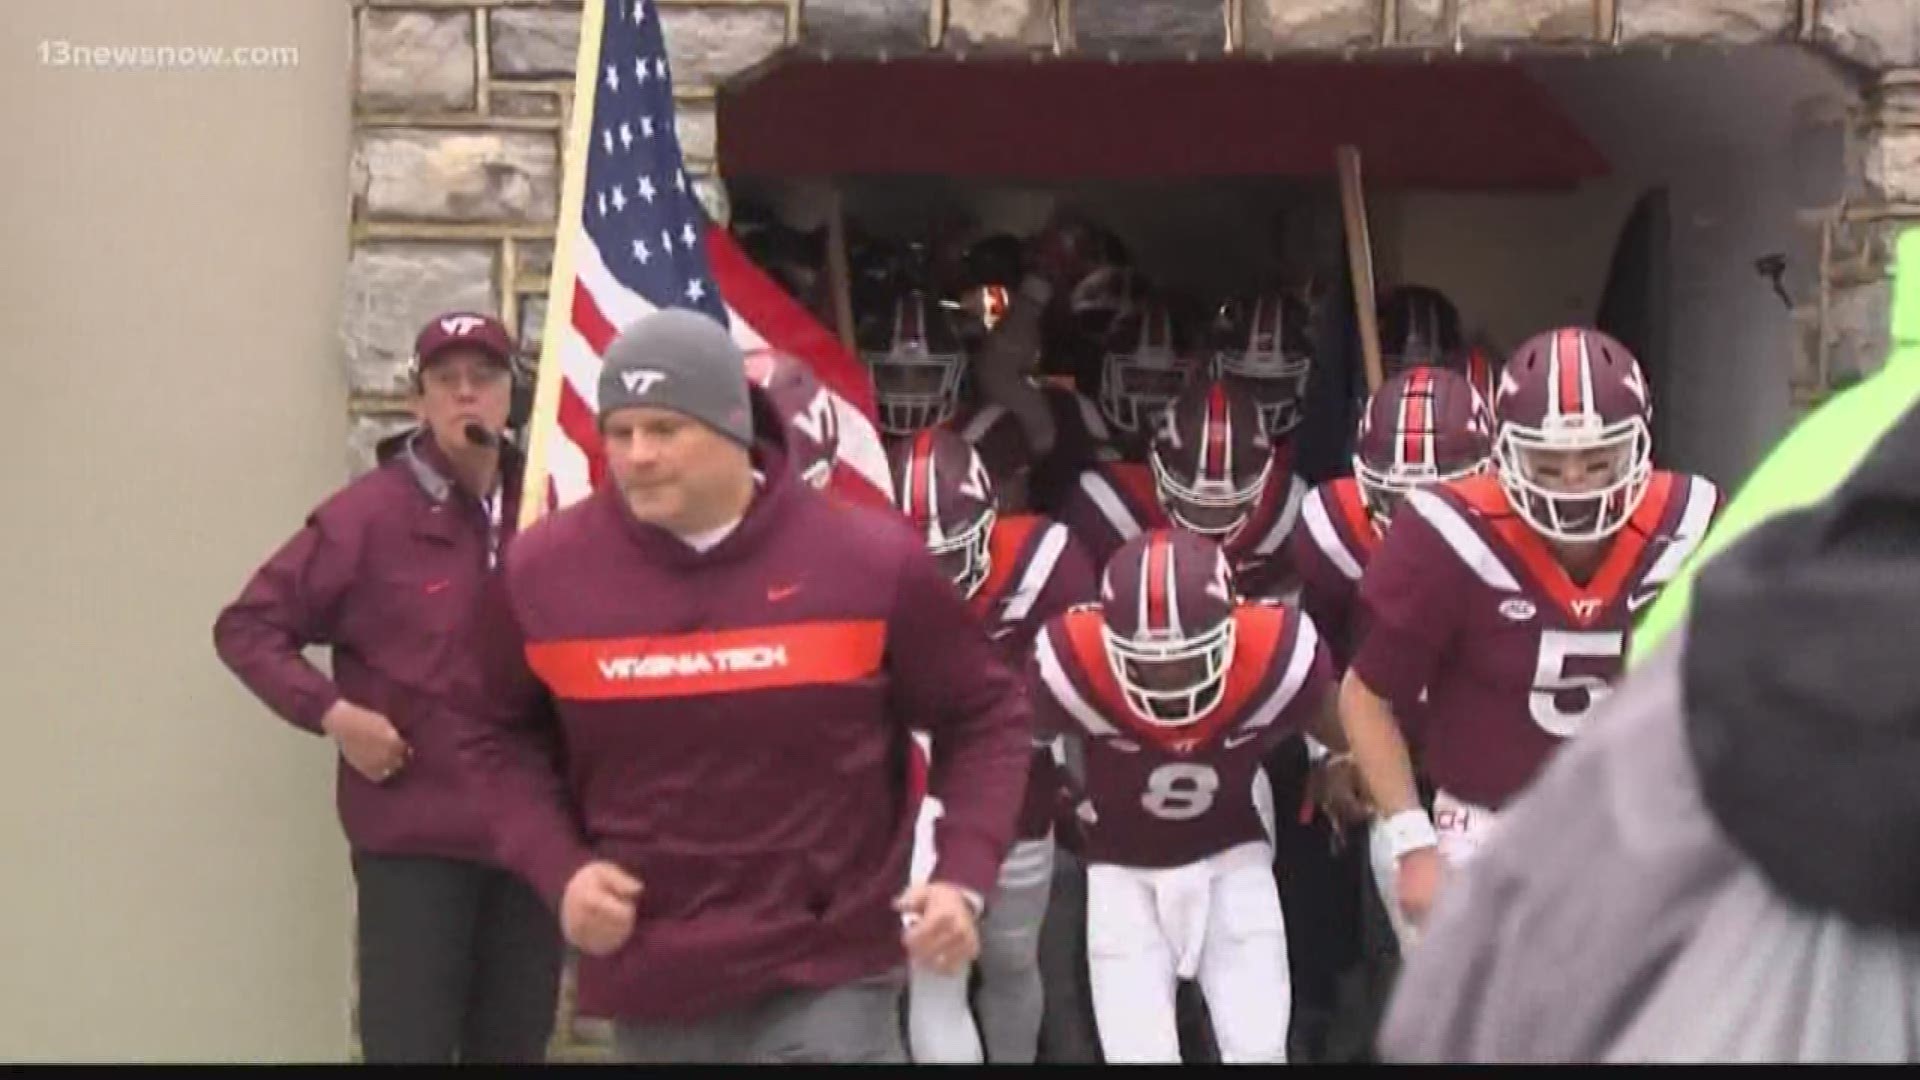 The Hokies will take on the Bearcats in the Military Bowl from Annapolis, Maryland. It's Tech's NCAA recognized 26th straight bowl appearance.